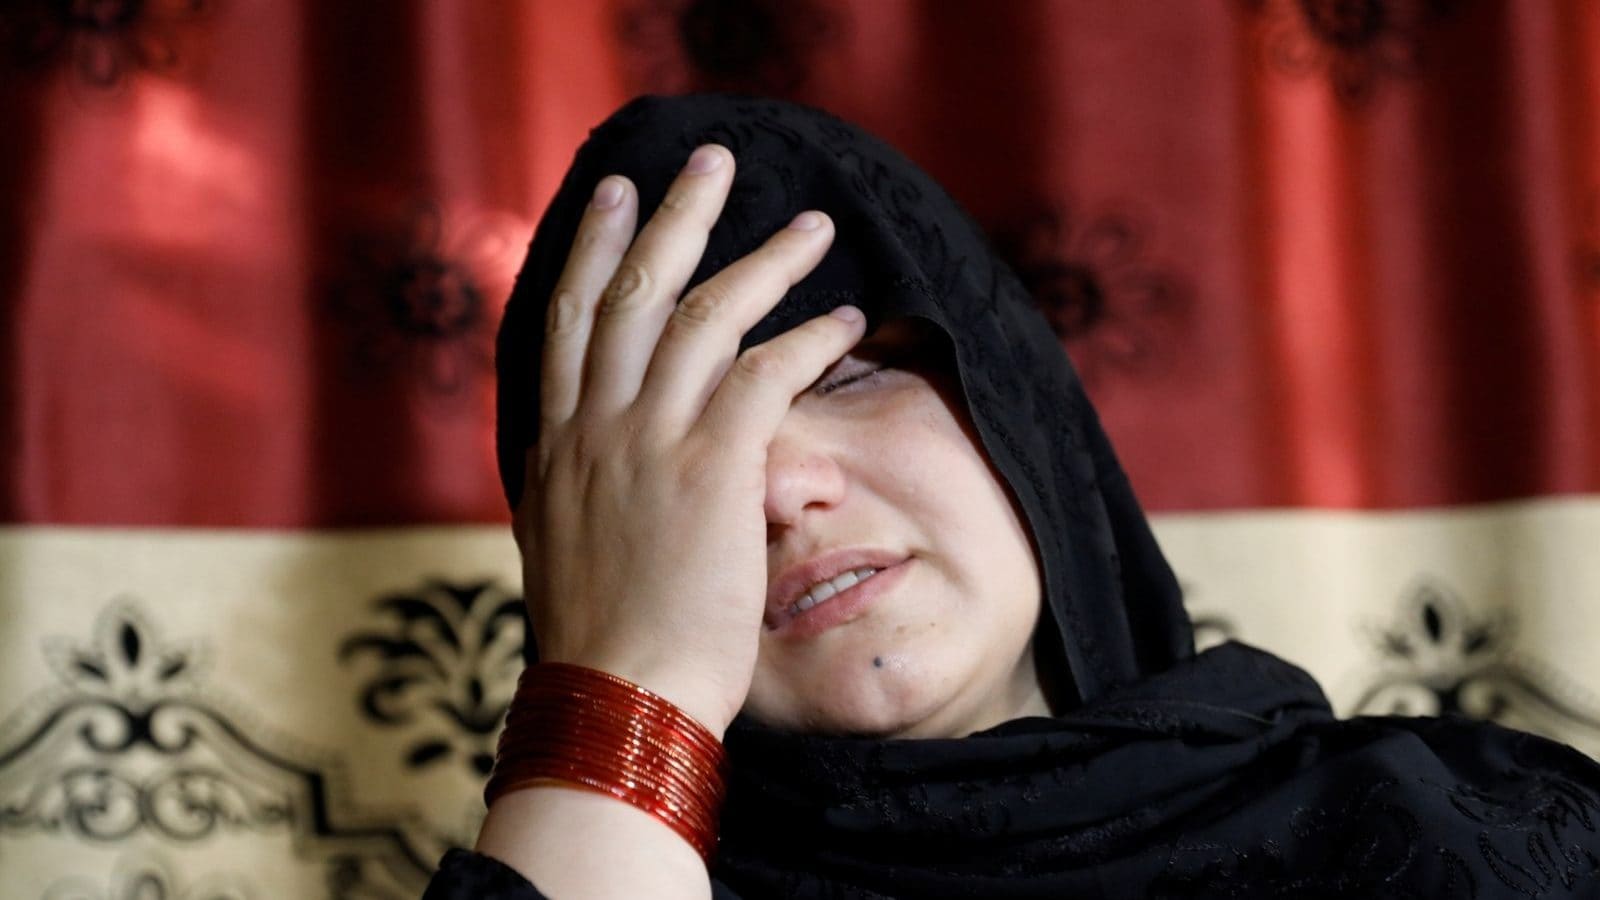 Muslim Forced Hijab Girl Hot Sex - Stoning for Adultery, Execution for Tight Clothes: Taliban's Medieval  Gender Rules for Afghan Women